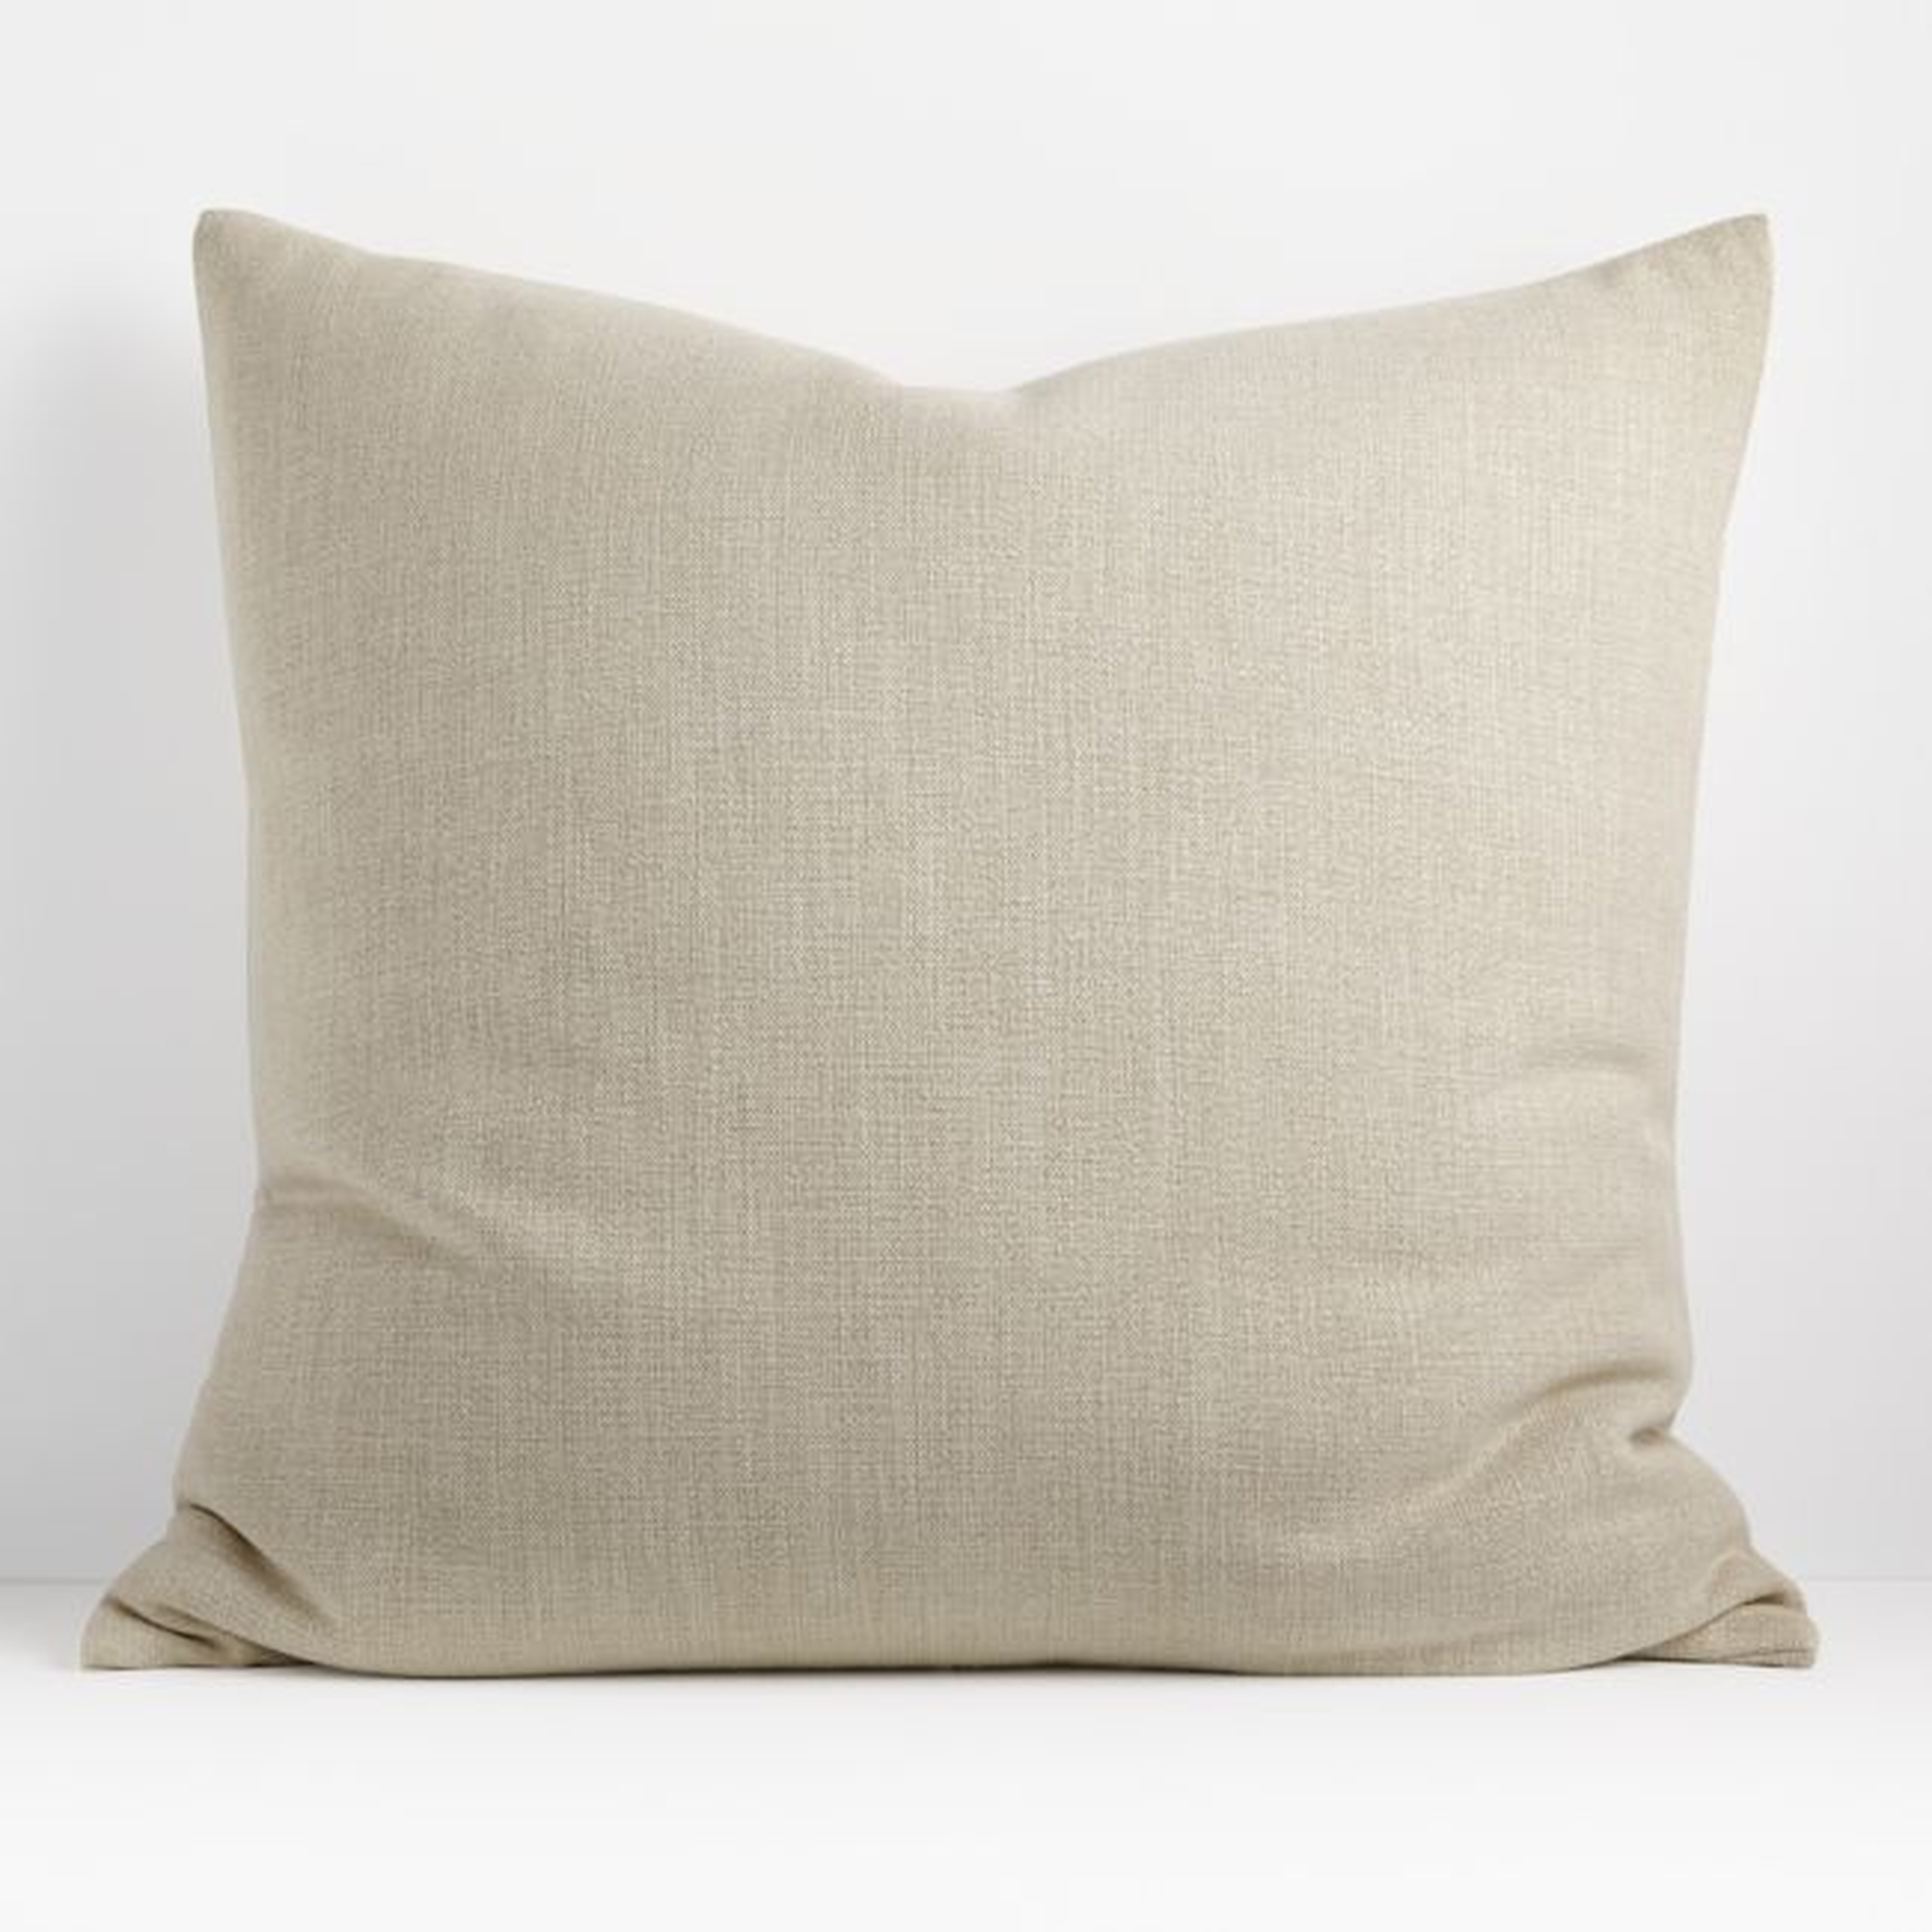 Plain Weave Sand 30x30 Pillow  with Feather-Down Insert - Crate and Barrel